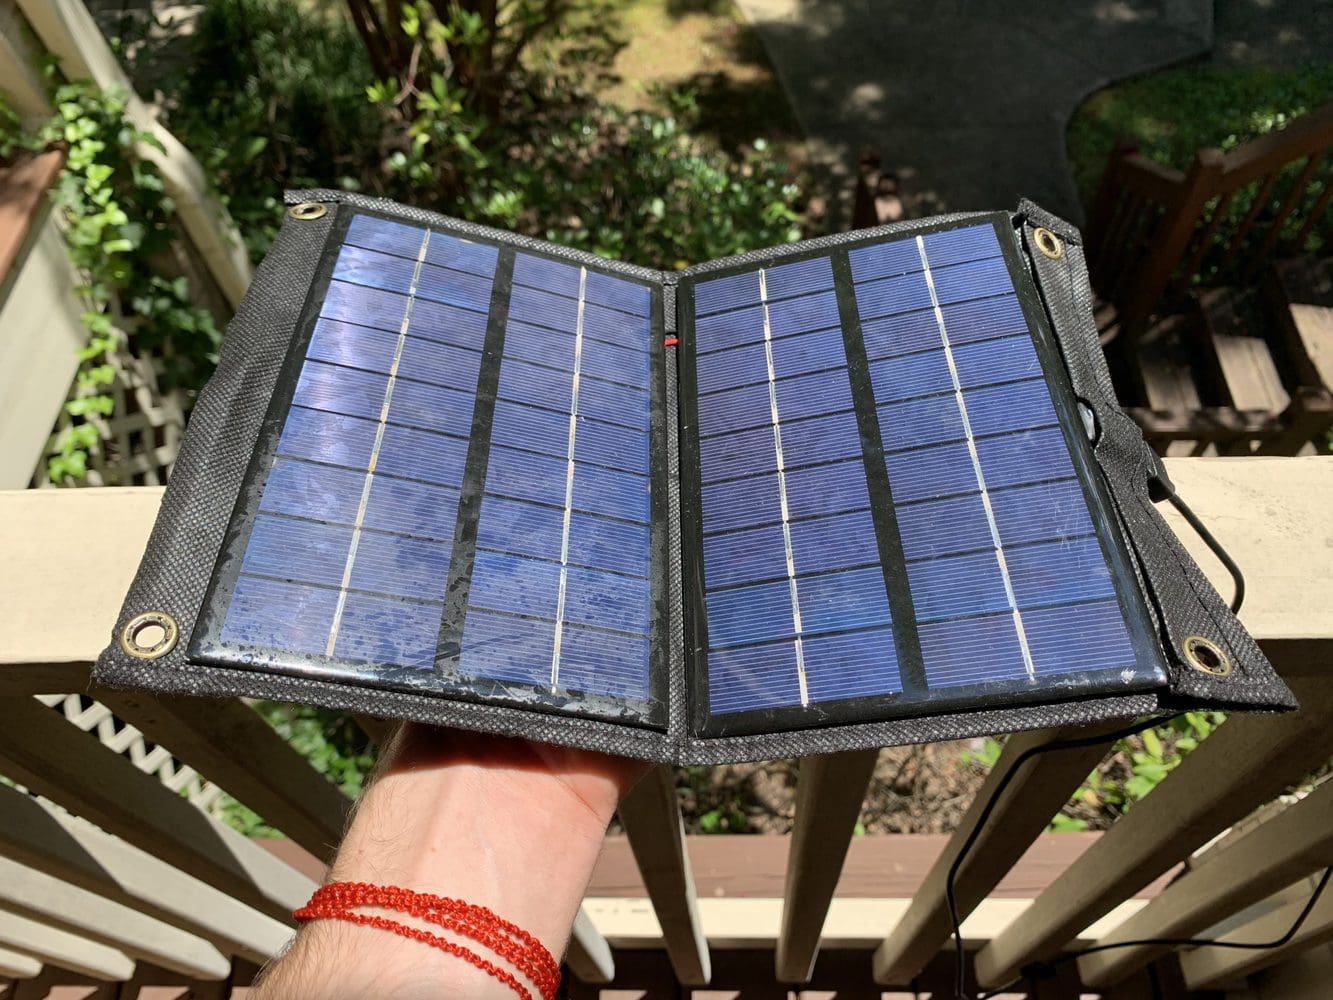 Mini solar panel with USB port to charge phones